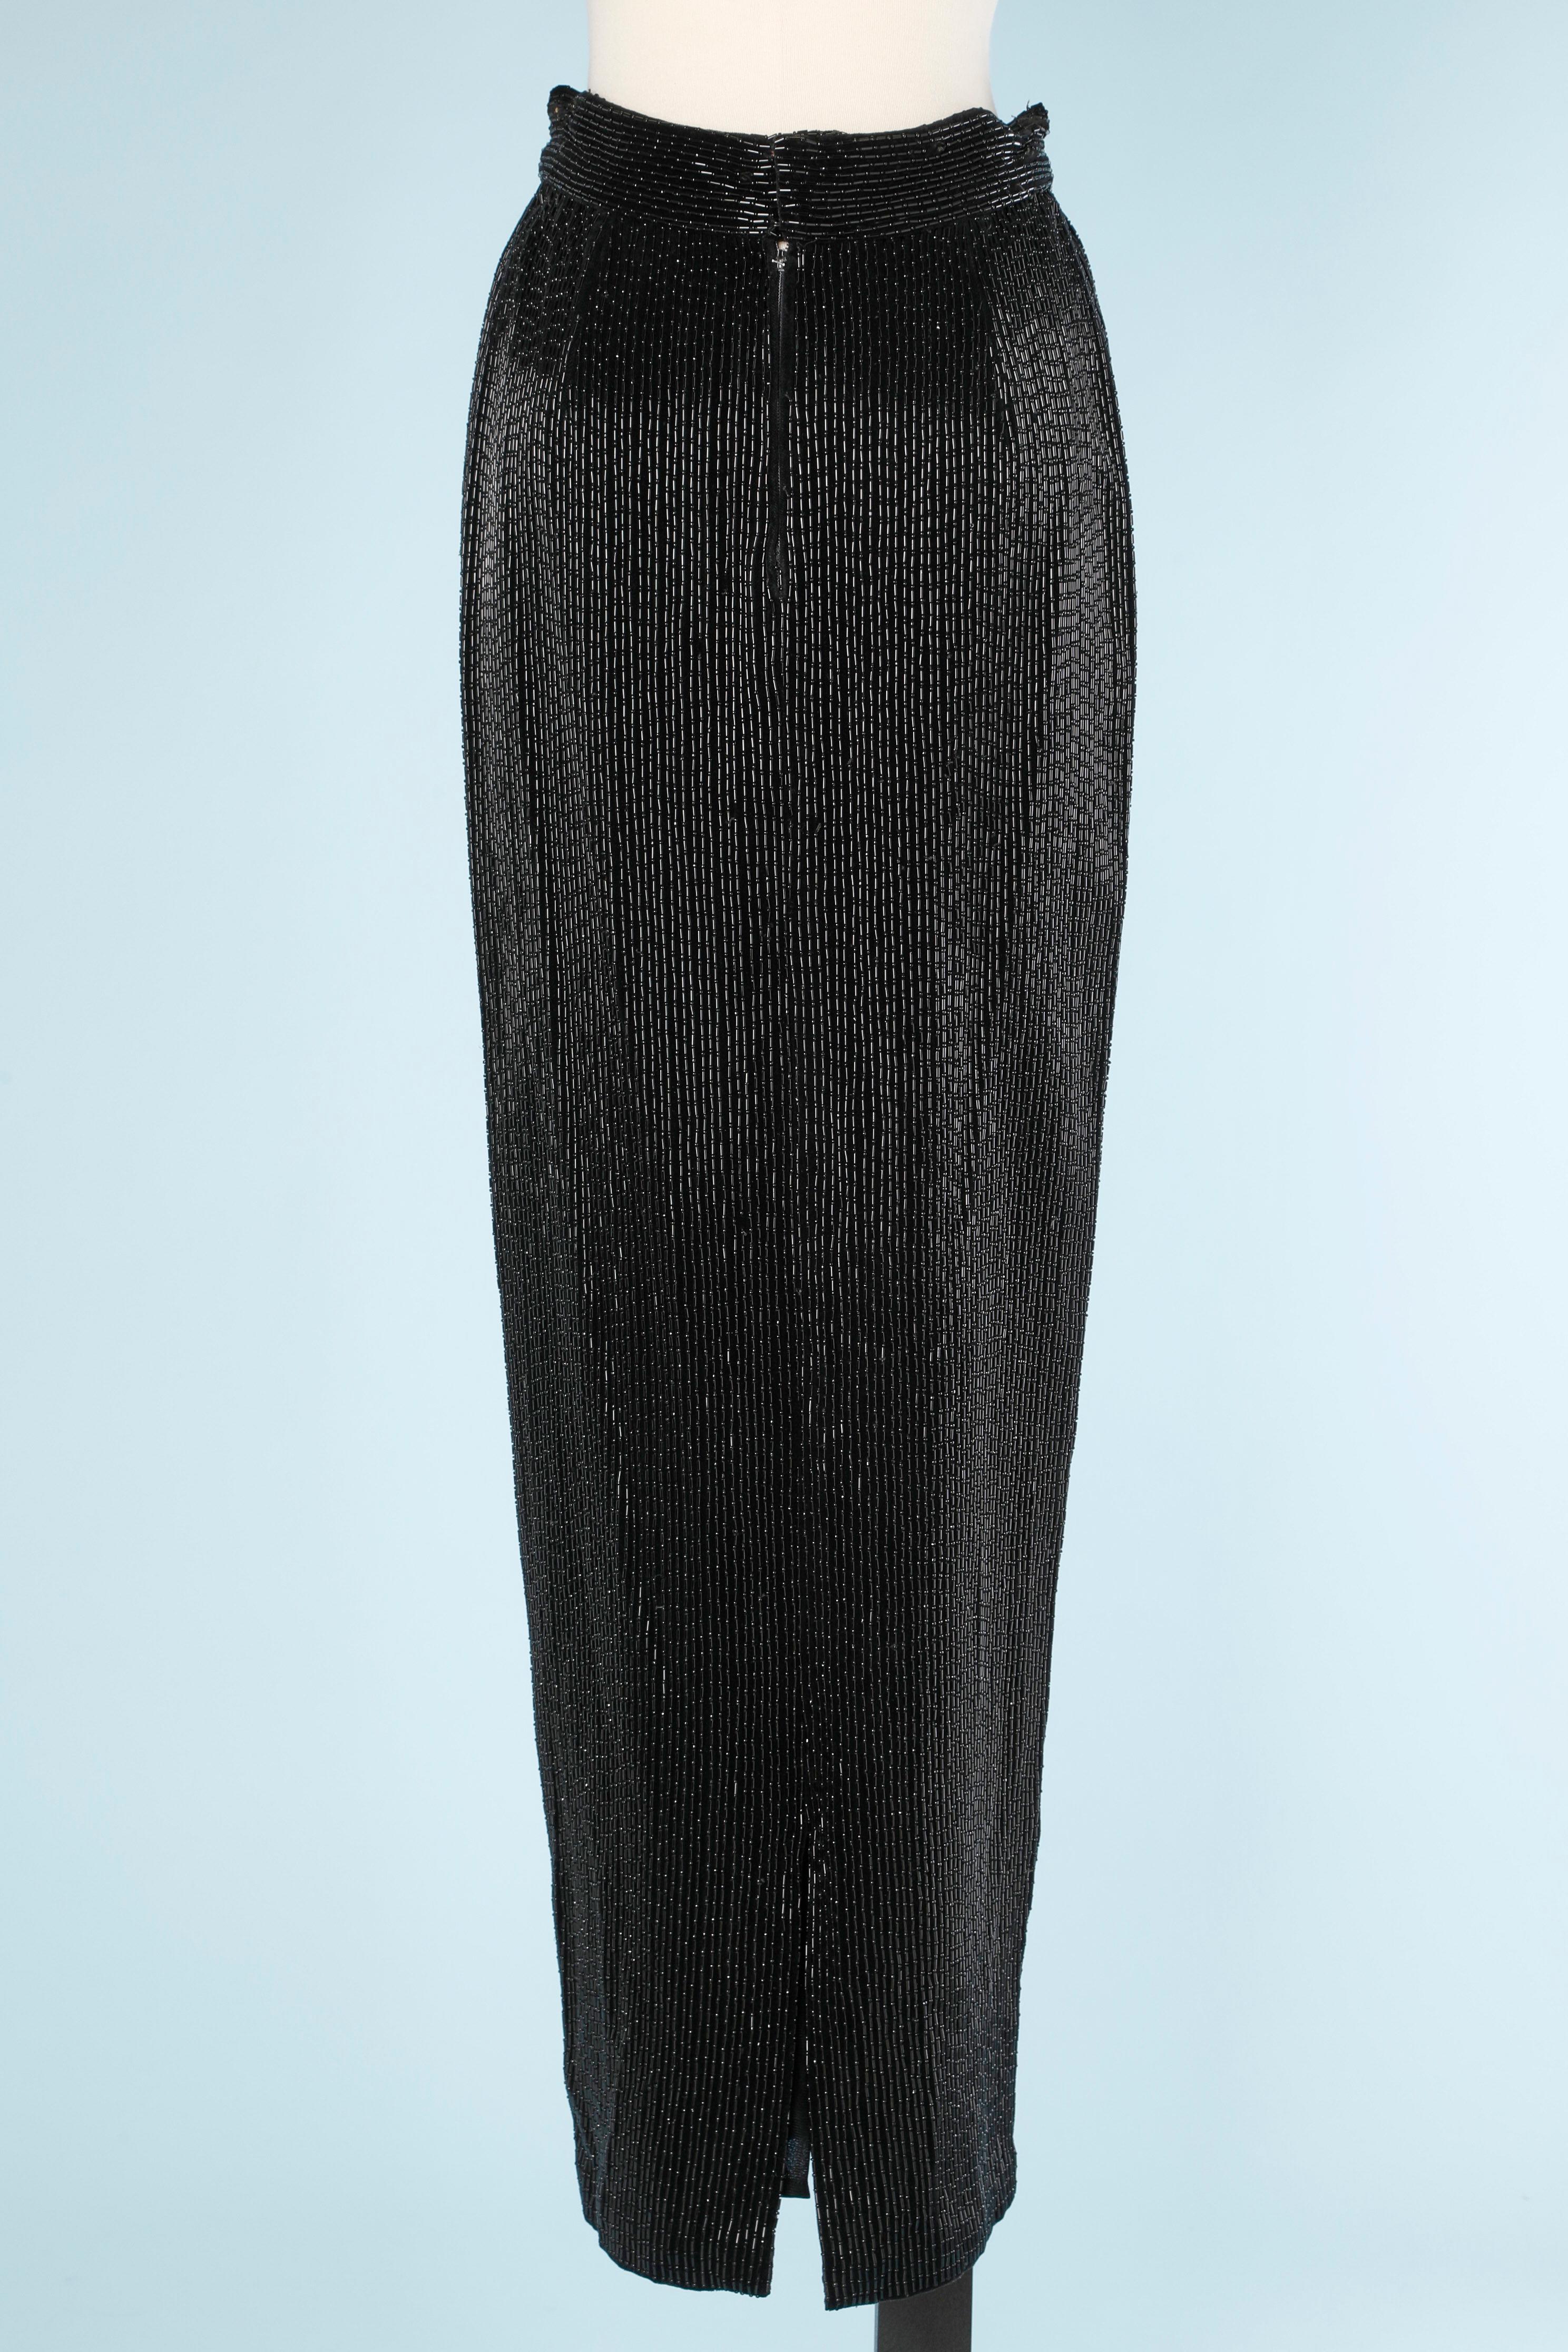 Long evening pencil black skirt fully embroidered Gianni Versace  In Excellent Condition For Sale In Saint-Ouen-Sur-Seine, FR